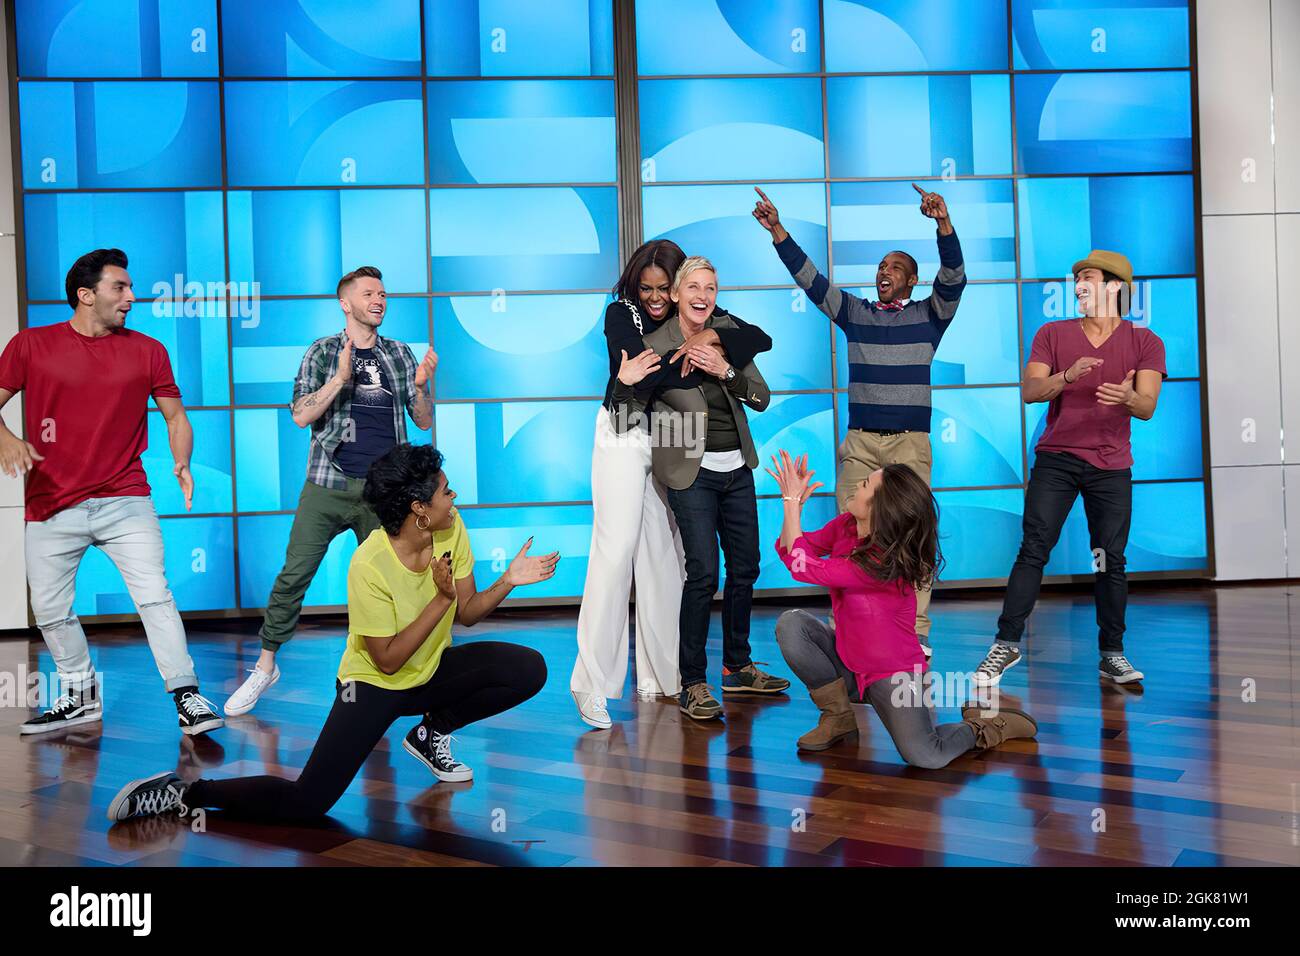 First Lady Michelle Obama hugs Ellen DeGeneres after they perform a #GimmeFive 'Let's Move!' dance with the 'So You Think You Can Dance' dancers during a taping of The Ellen DeGeneres Show in Burbank, Calif., March 12, 2015. (Official White House Photo by Amanda Lucidon) This official White House photograph is being made available only for publication by news organizations and/or for personal use printing by the subject(s) of the photograph. The photograph may not be manipulated in any way and may not be used in commercial or political materials, advertisements, emails, products, promotions th Stock Photo